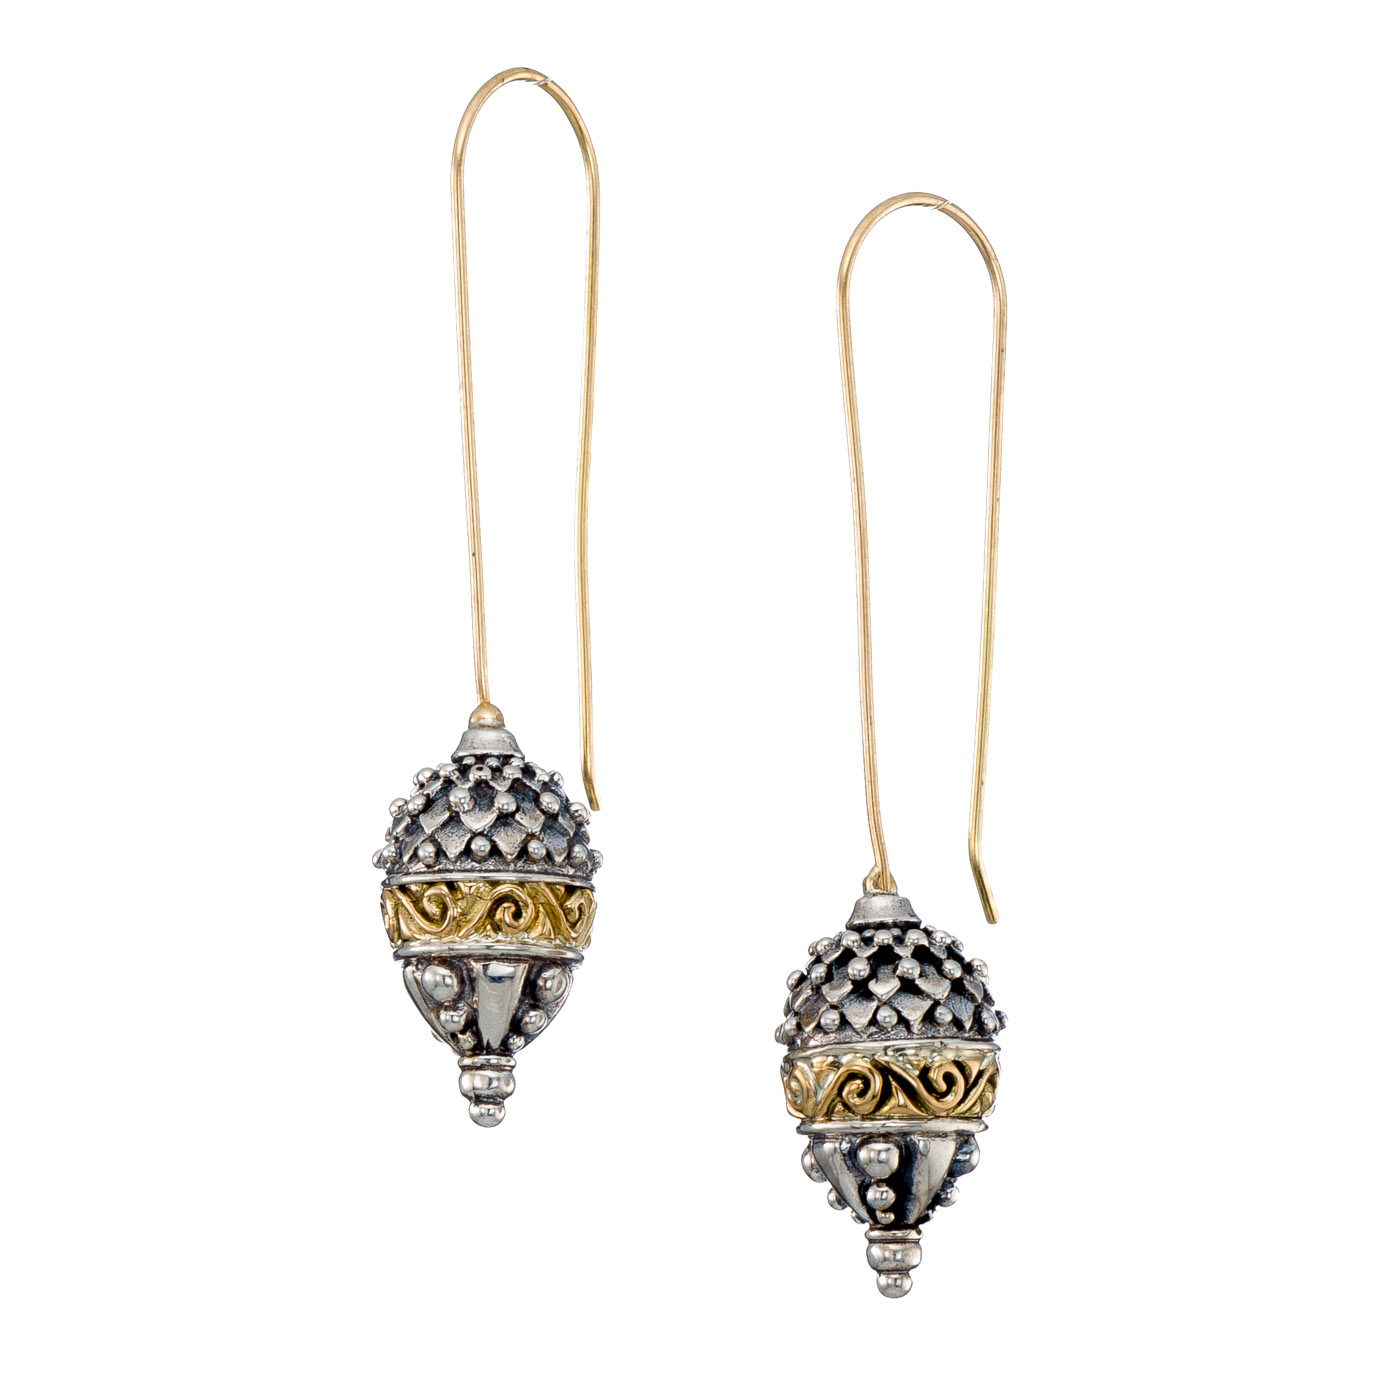 Santorini pine cone earrings in 18K Gold and Sterling Silver